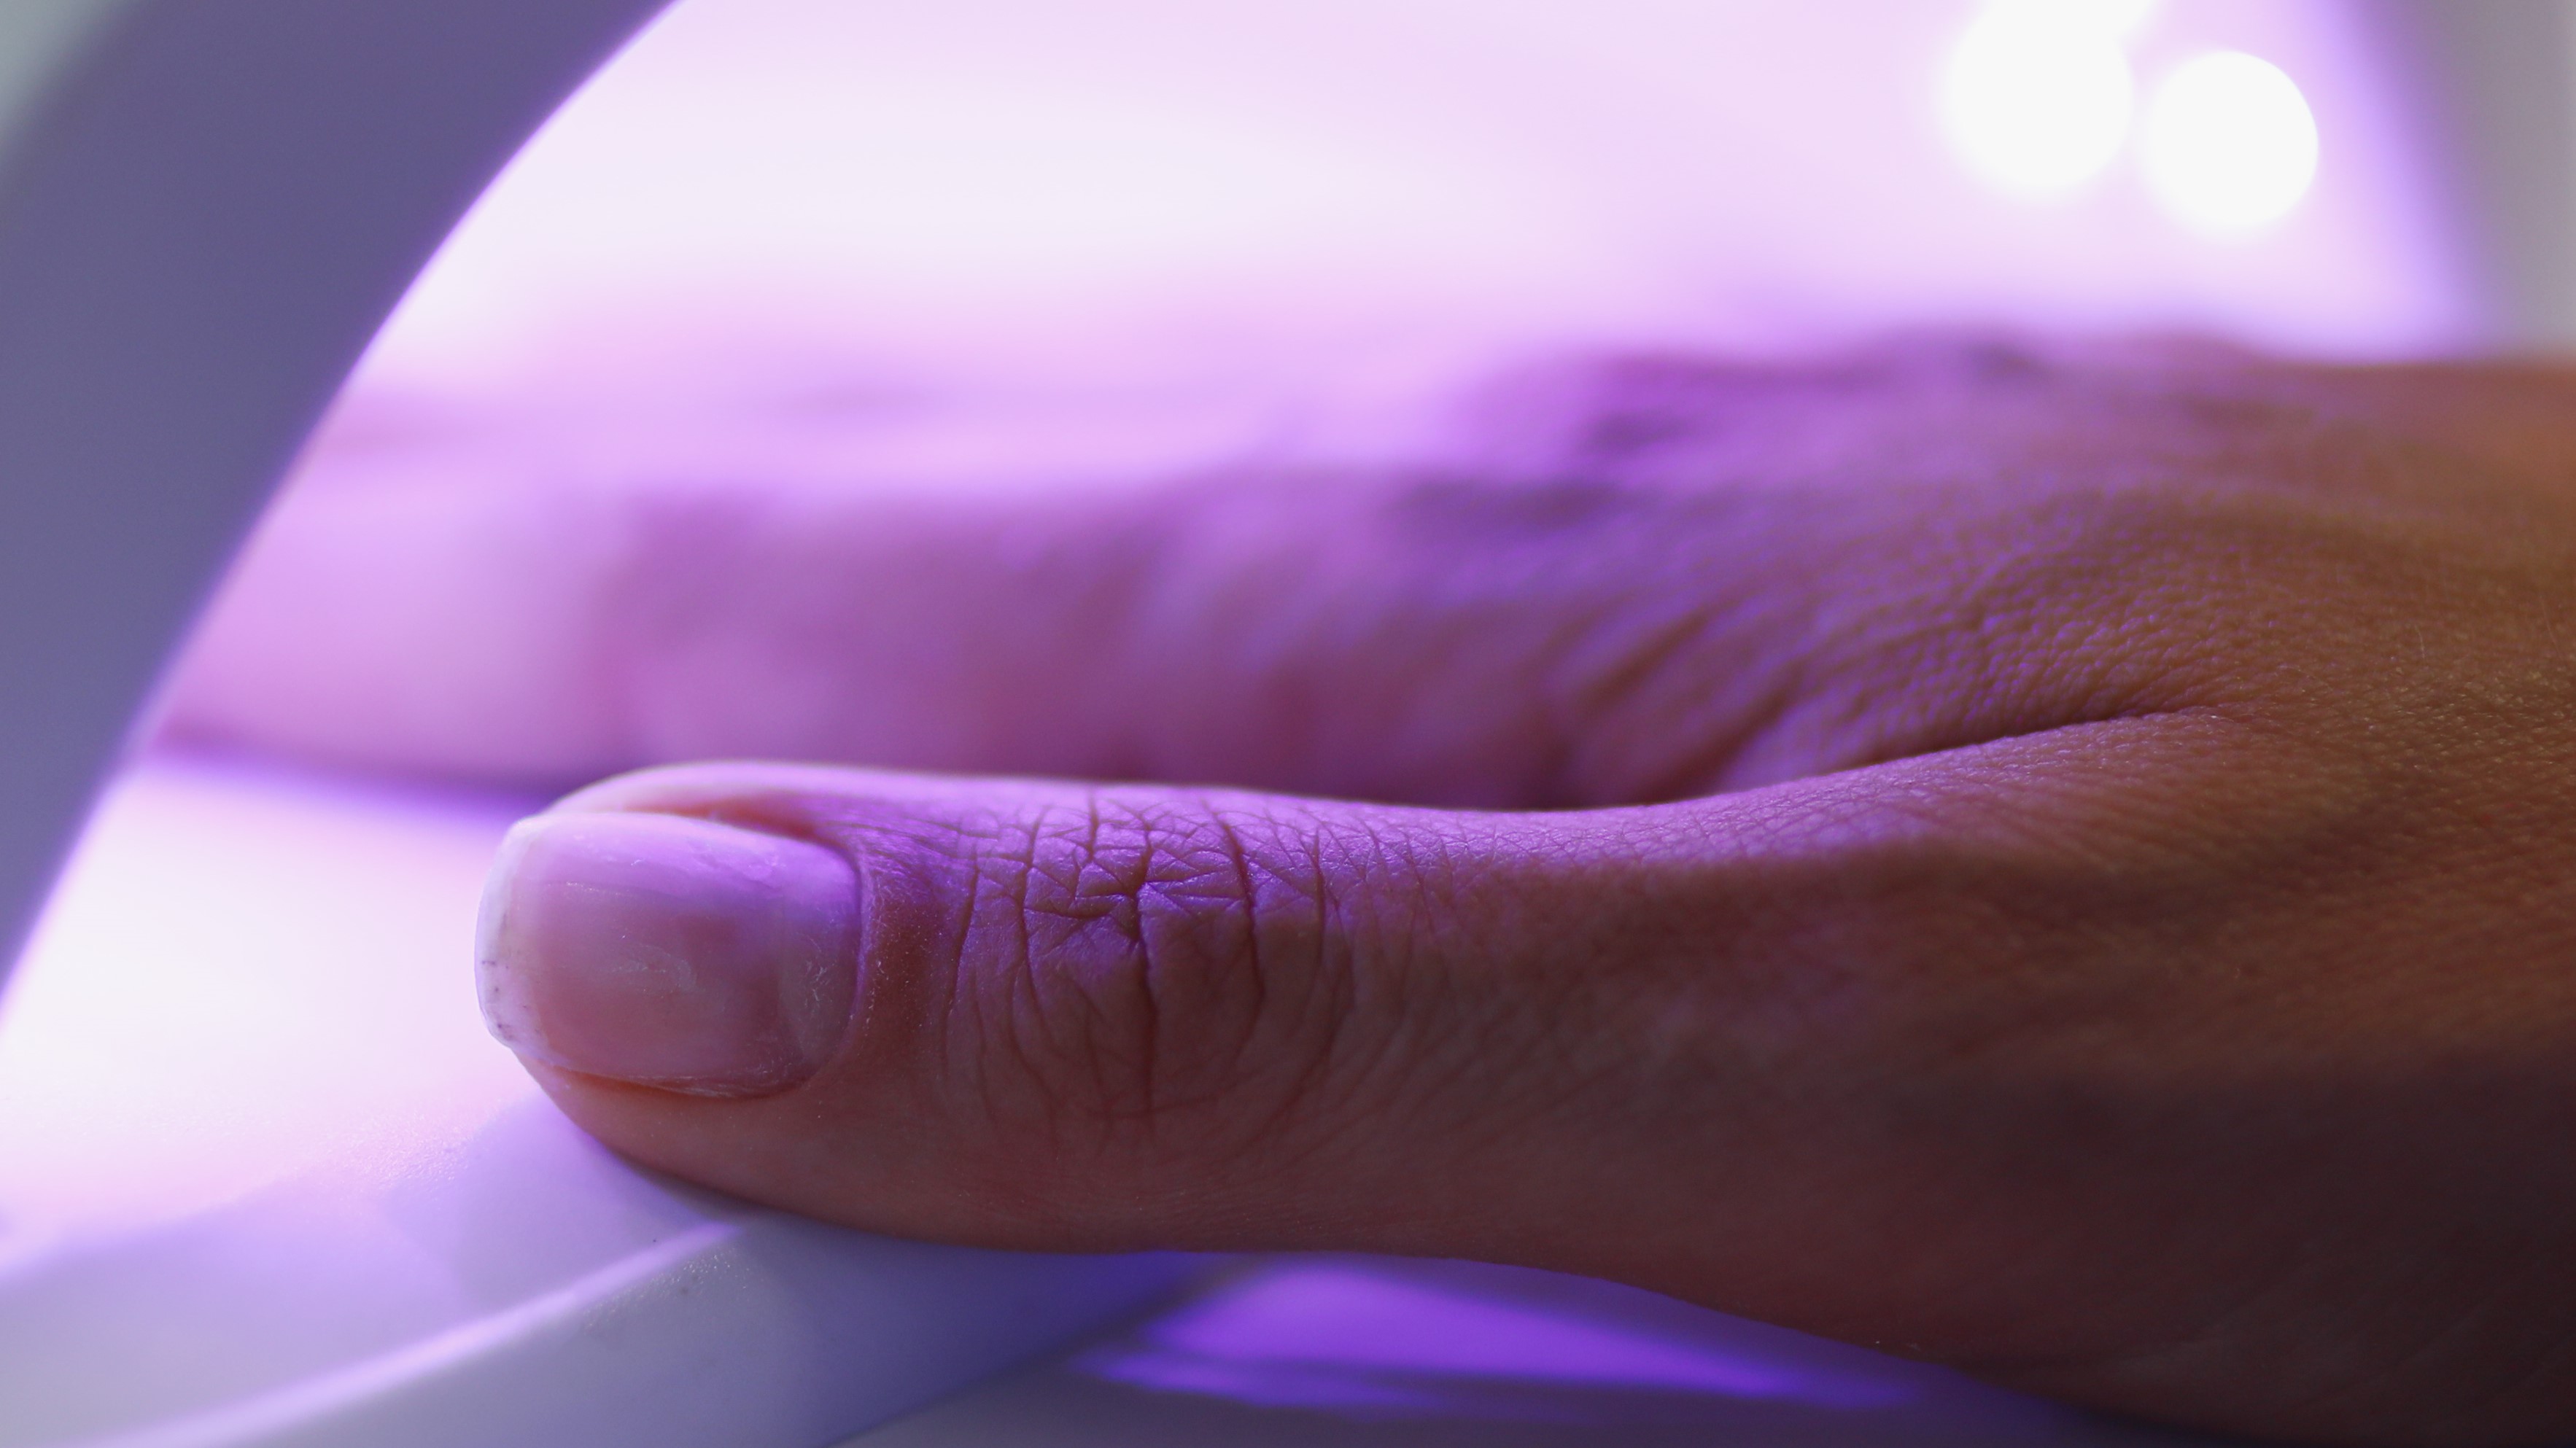 A new study found that UV nail dryers can cause cell damage and mutati